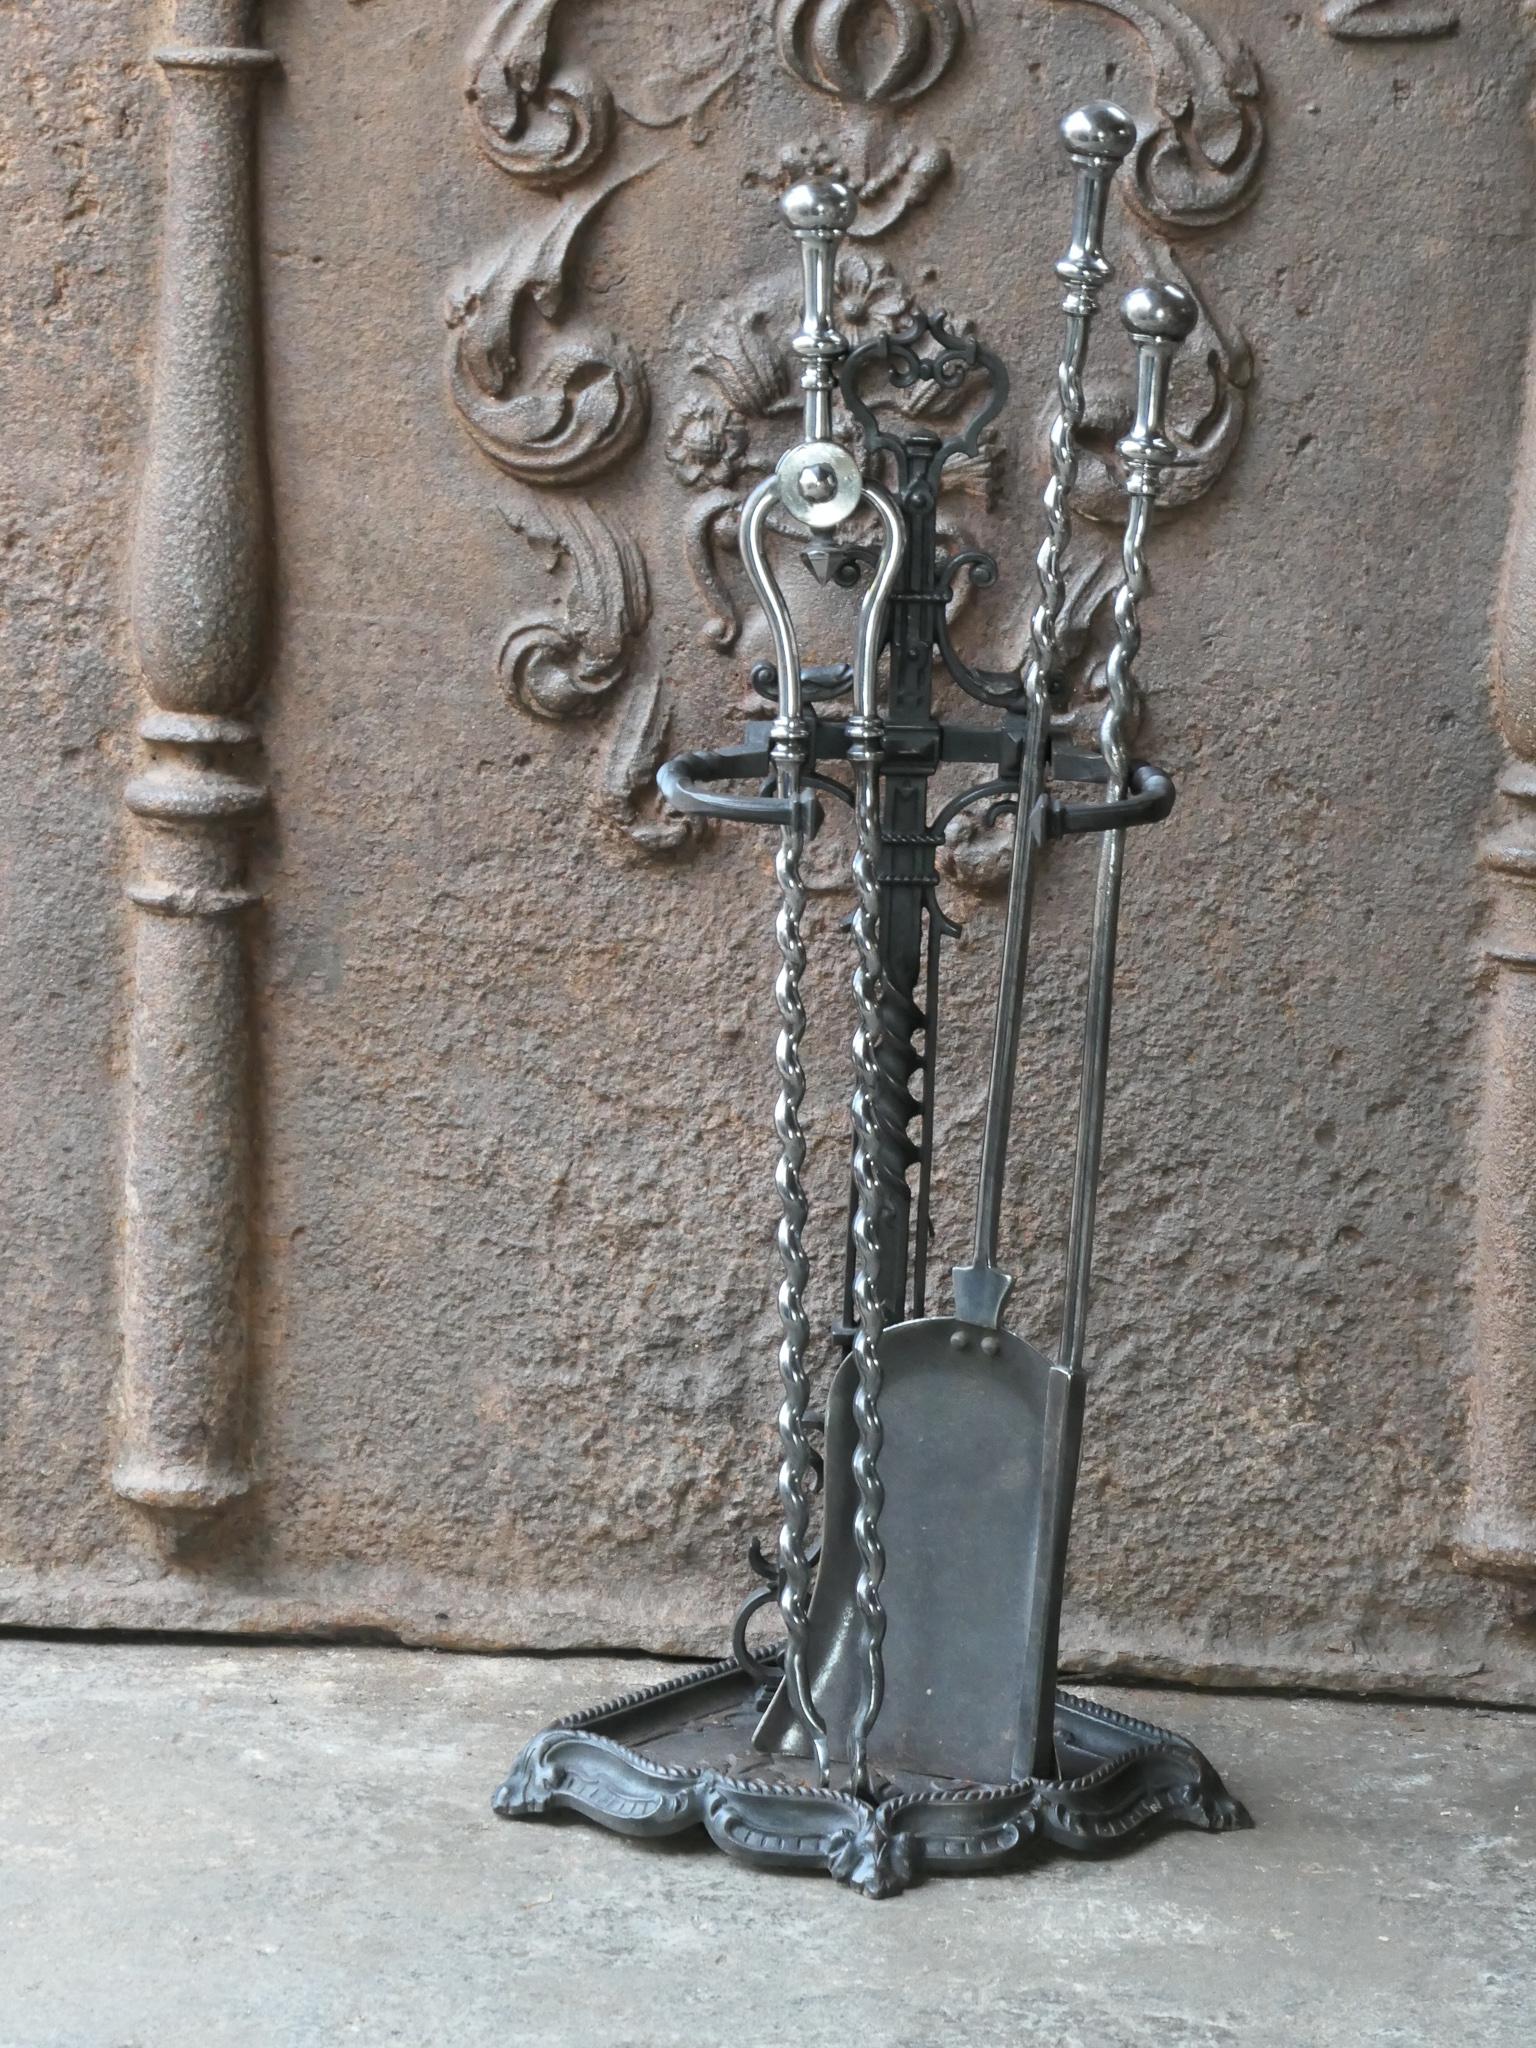 Beautifully decorated 19th century English Victorian fireplace tools. The tool set consists of thongs, shovel, poker and stand. The stand is made of cast iron and the tools are made from polished steel. The set has one minor loss but is otherwise